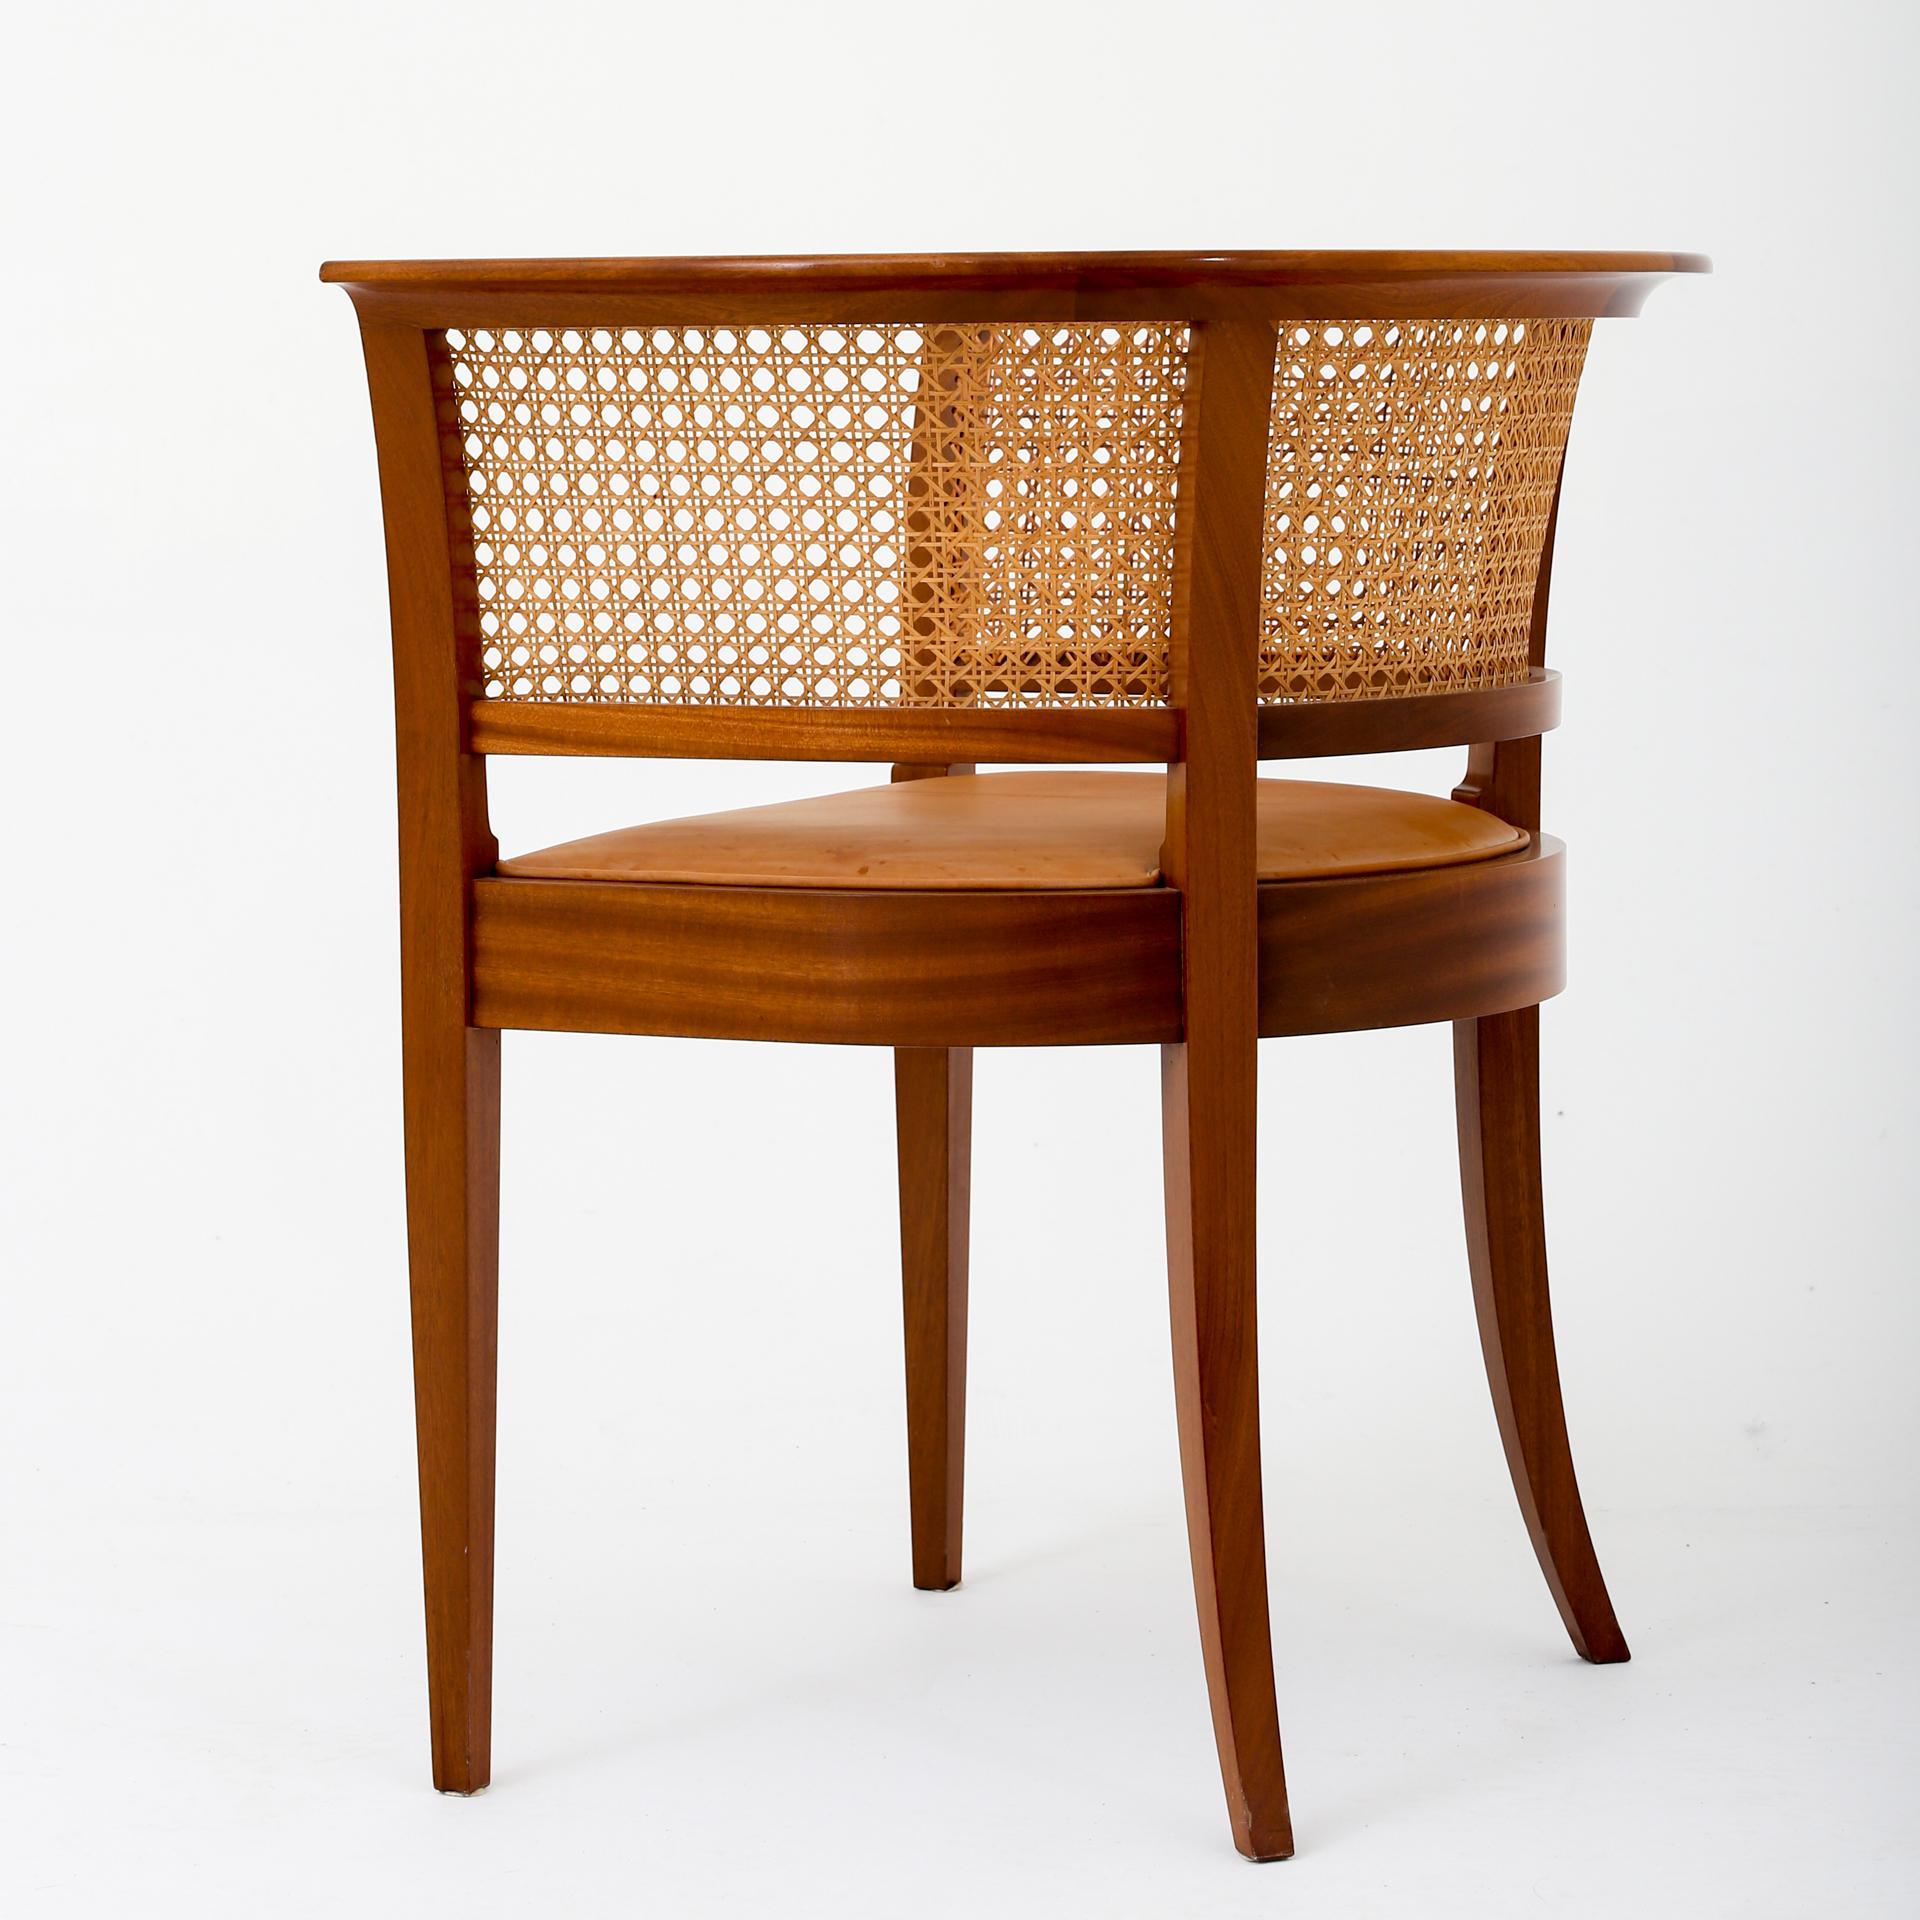 Kaare Klint and Rud. Rasmussen. Model 9662 - 'Faaborg' chair in mahogany with seat in light leather.